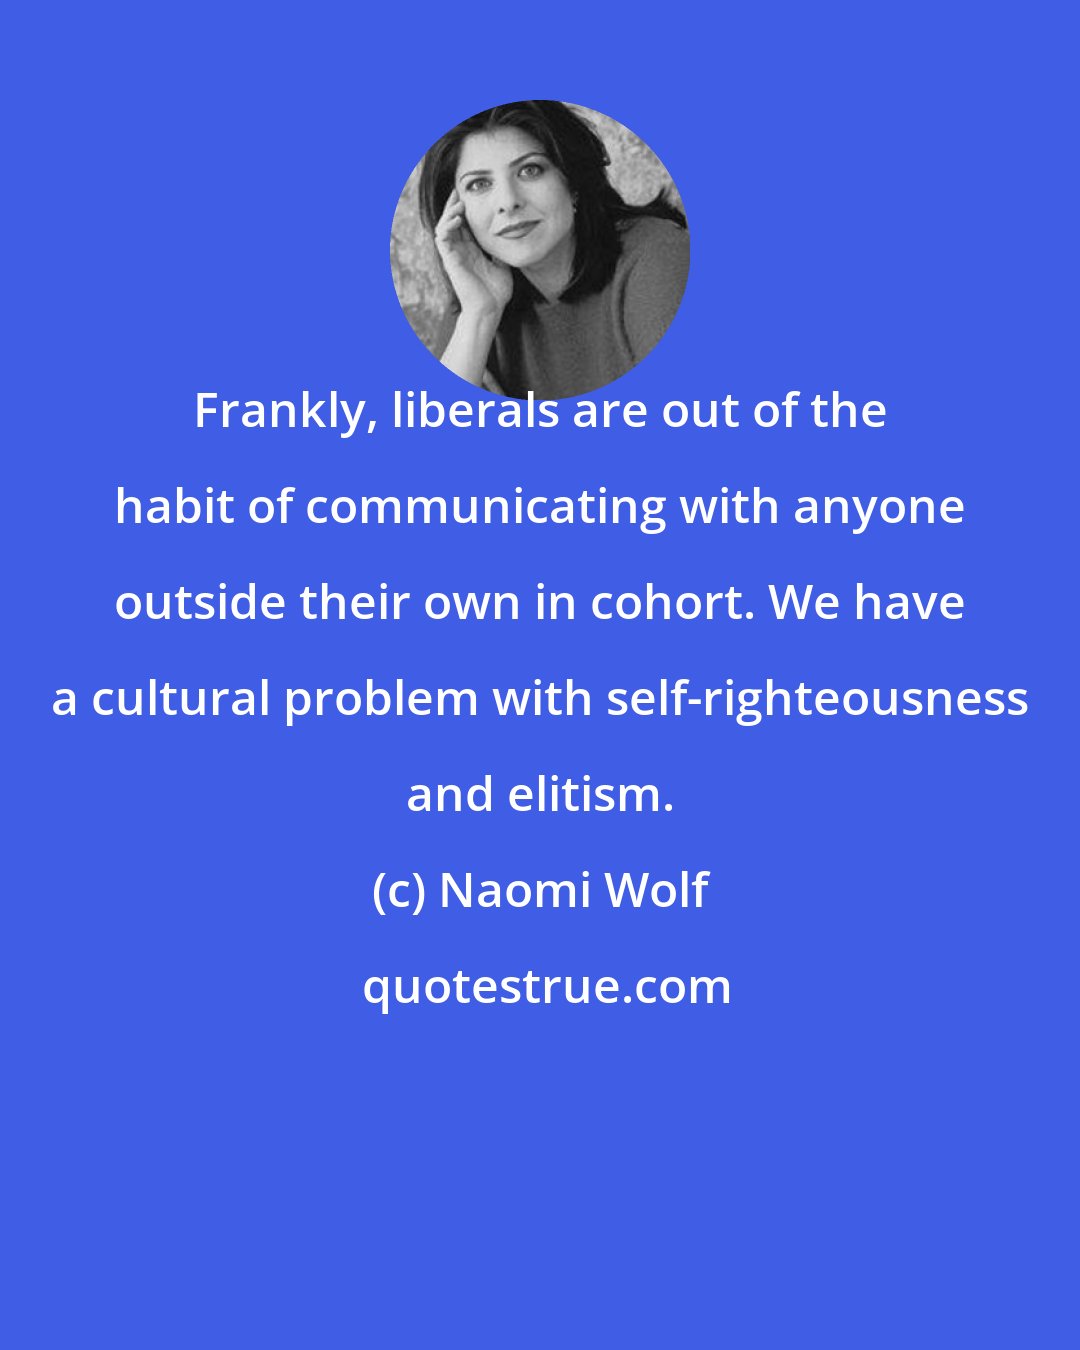 Naomi Wolf: Frankly, liberals are out of the habit of communicating with anyone outside their own in cohort. We have a cultural problem with self-righteousness and elitism.